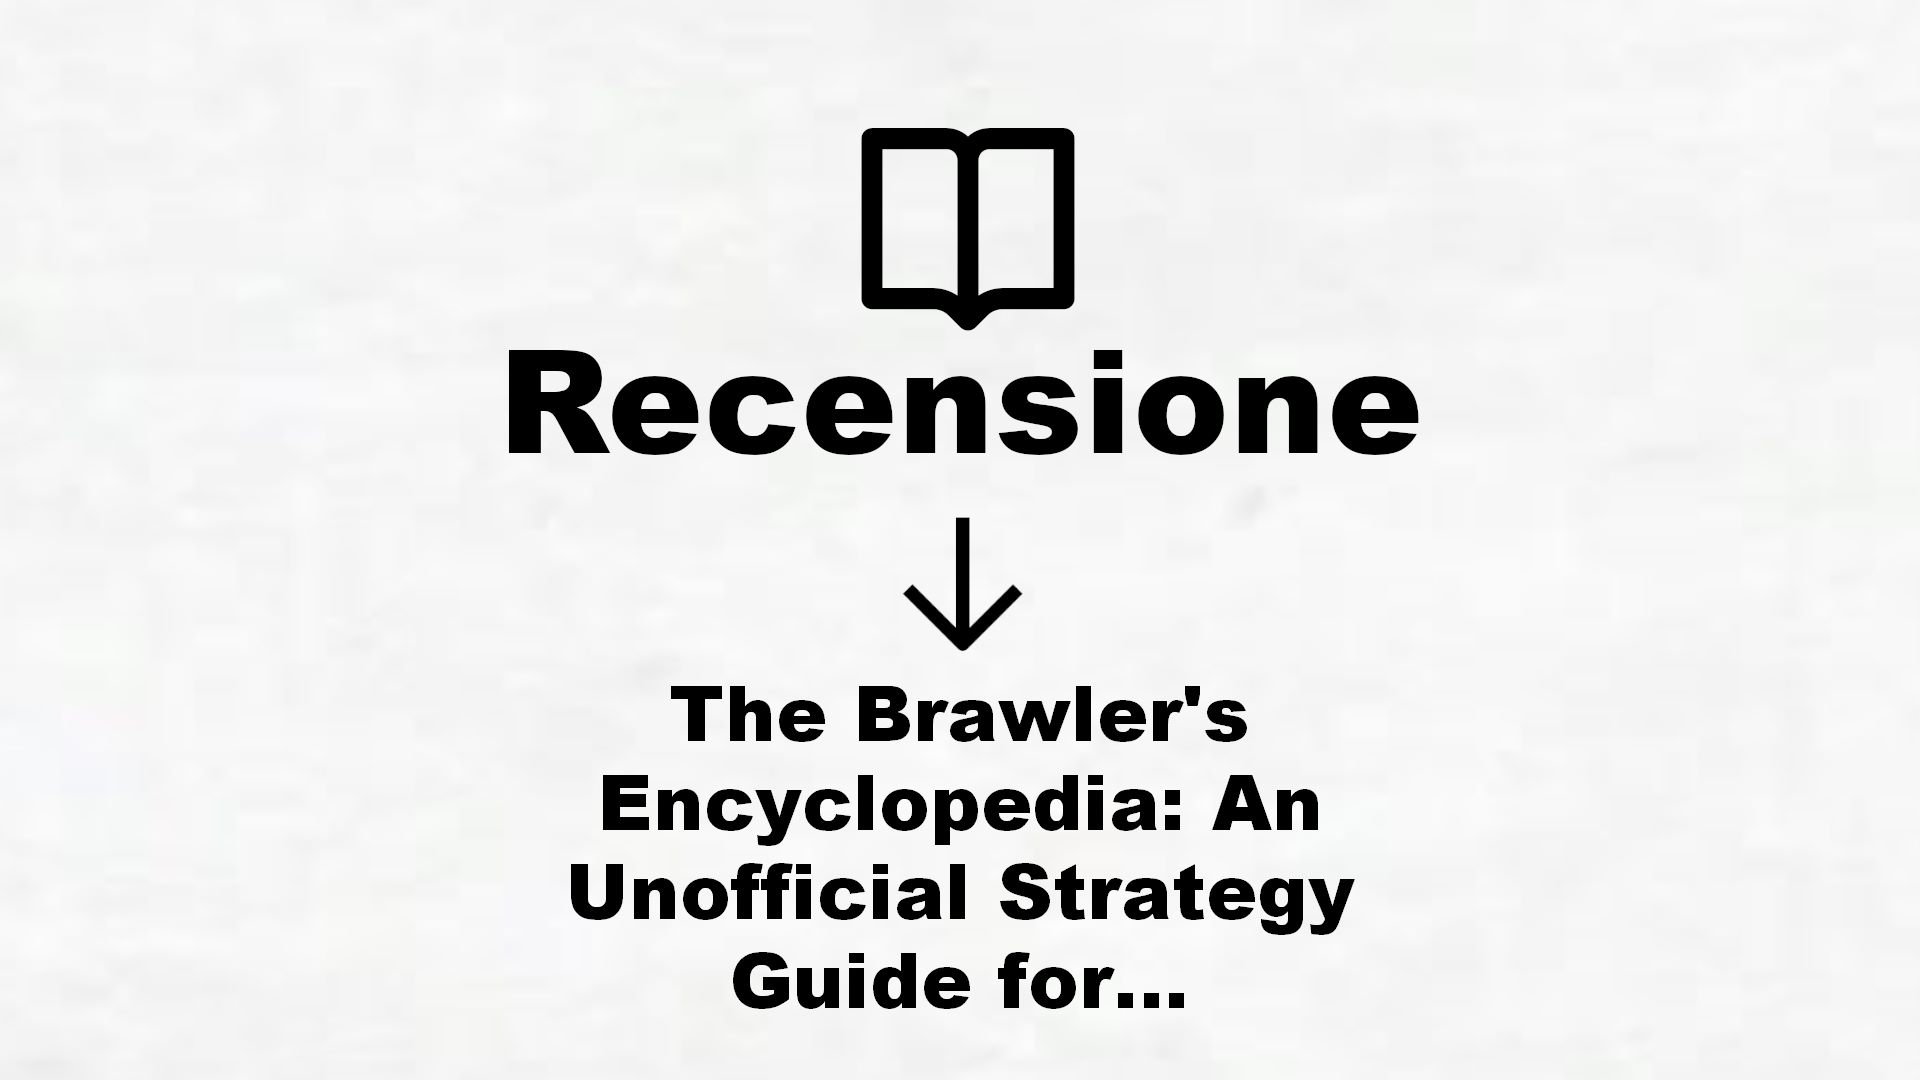 The Brawler’s Encyclopedia: An Unofficial Strategy Guide for Players of Brawl Stars – Recensione Libro